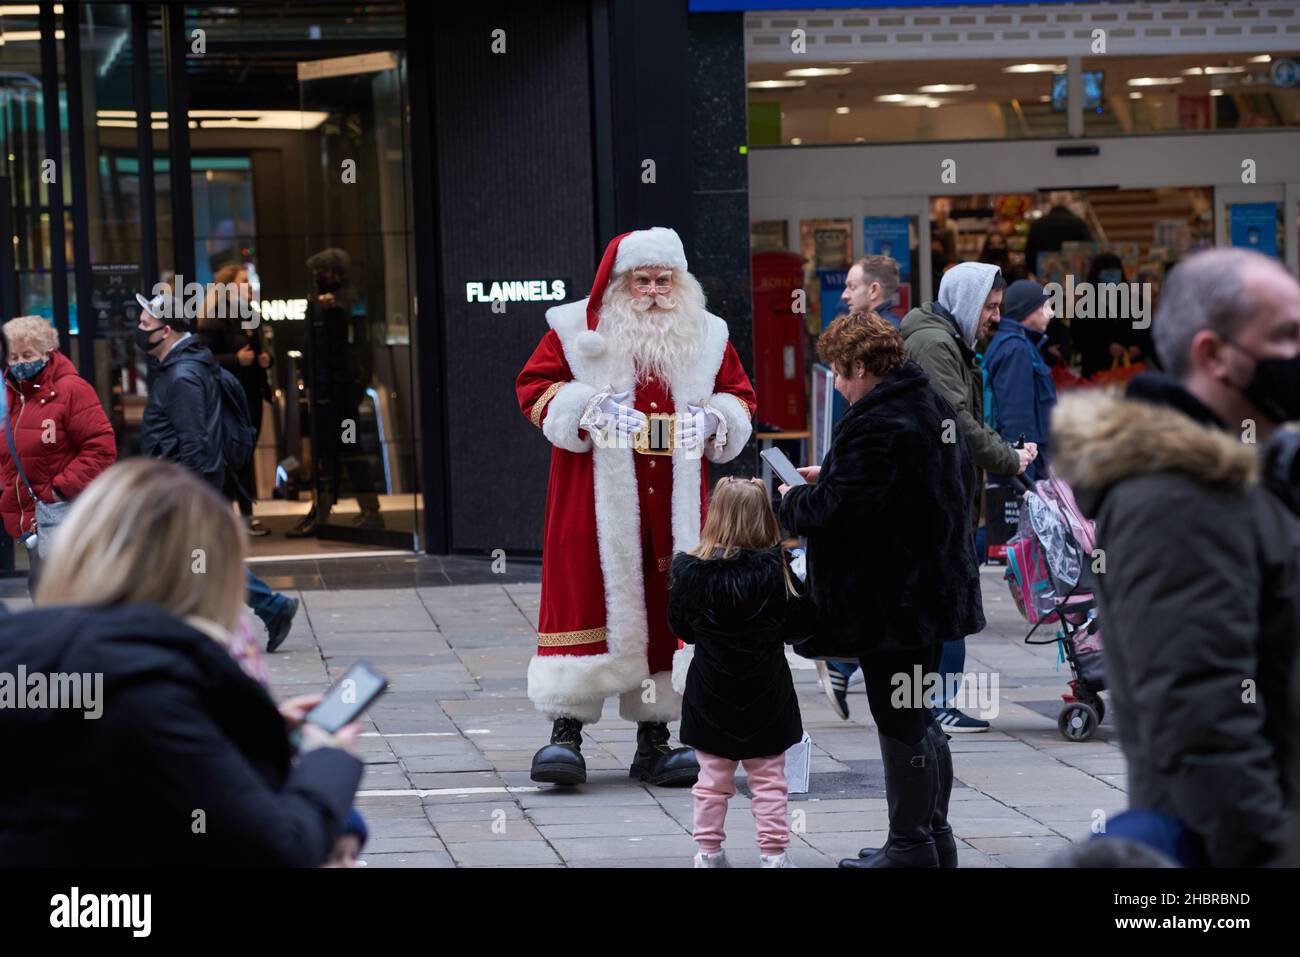 Newcastle, UK. 21st December, 2021. Busy crowds shopping on Northumberland Street as a Santa Claus enteratains them in, UK. Credit: Garry Cook/Alamy Live News. Stock Photo